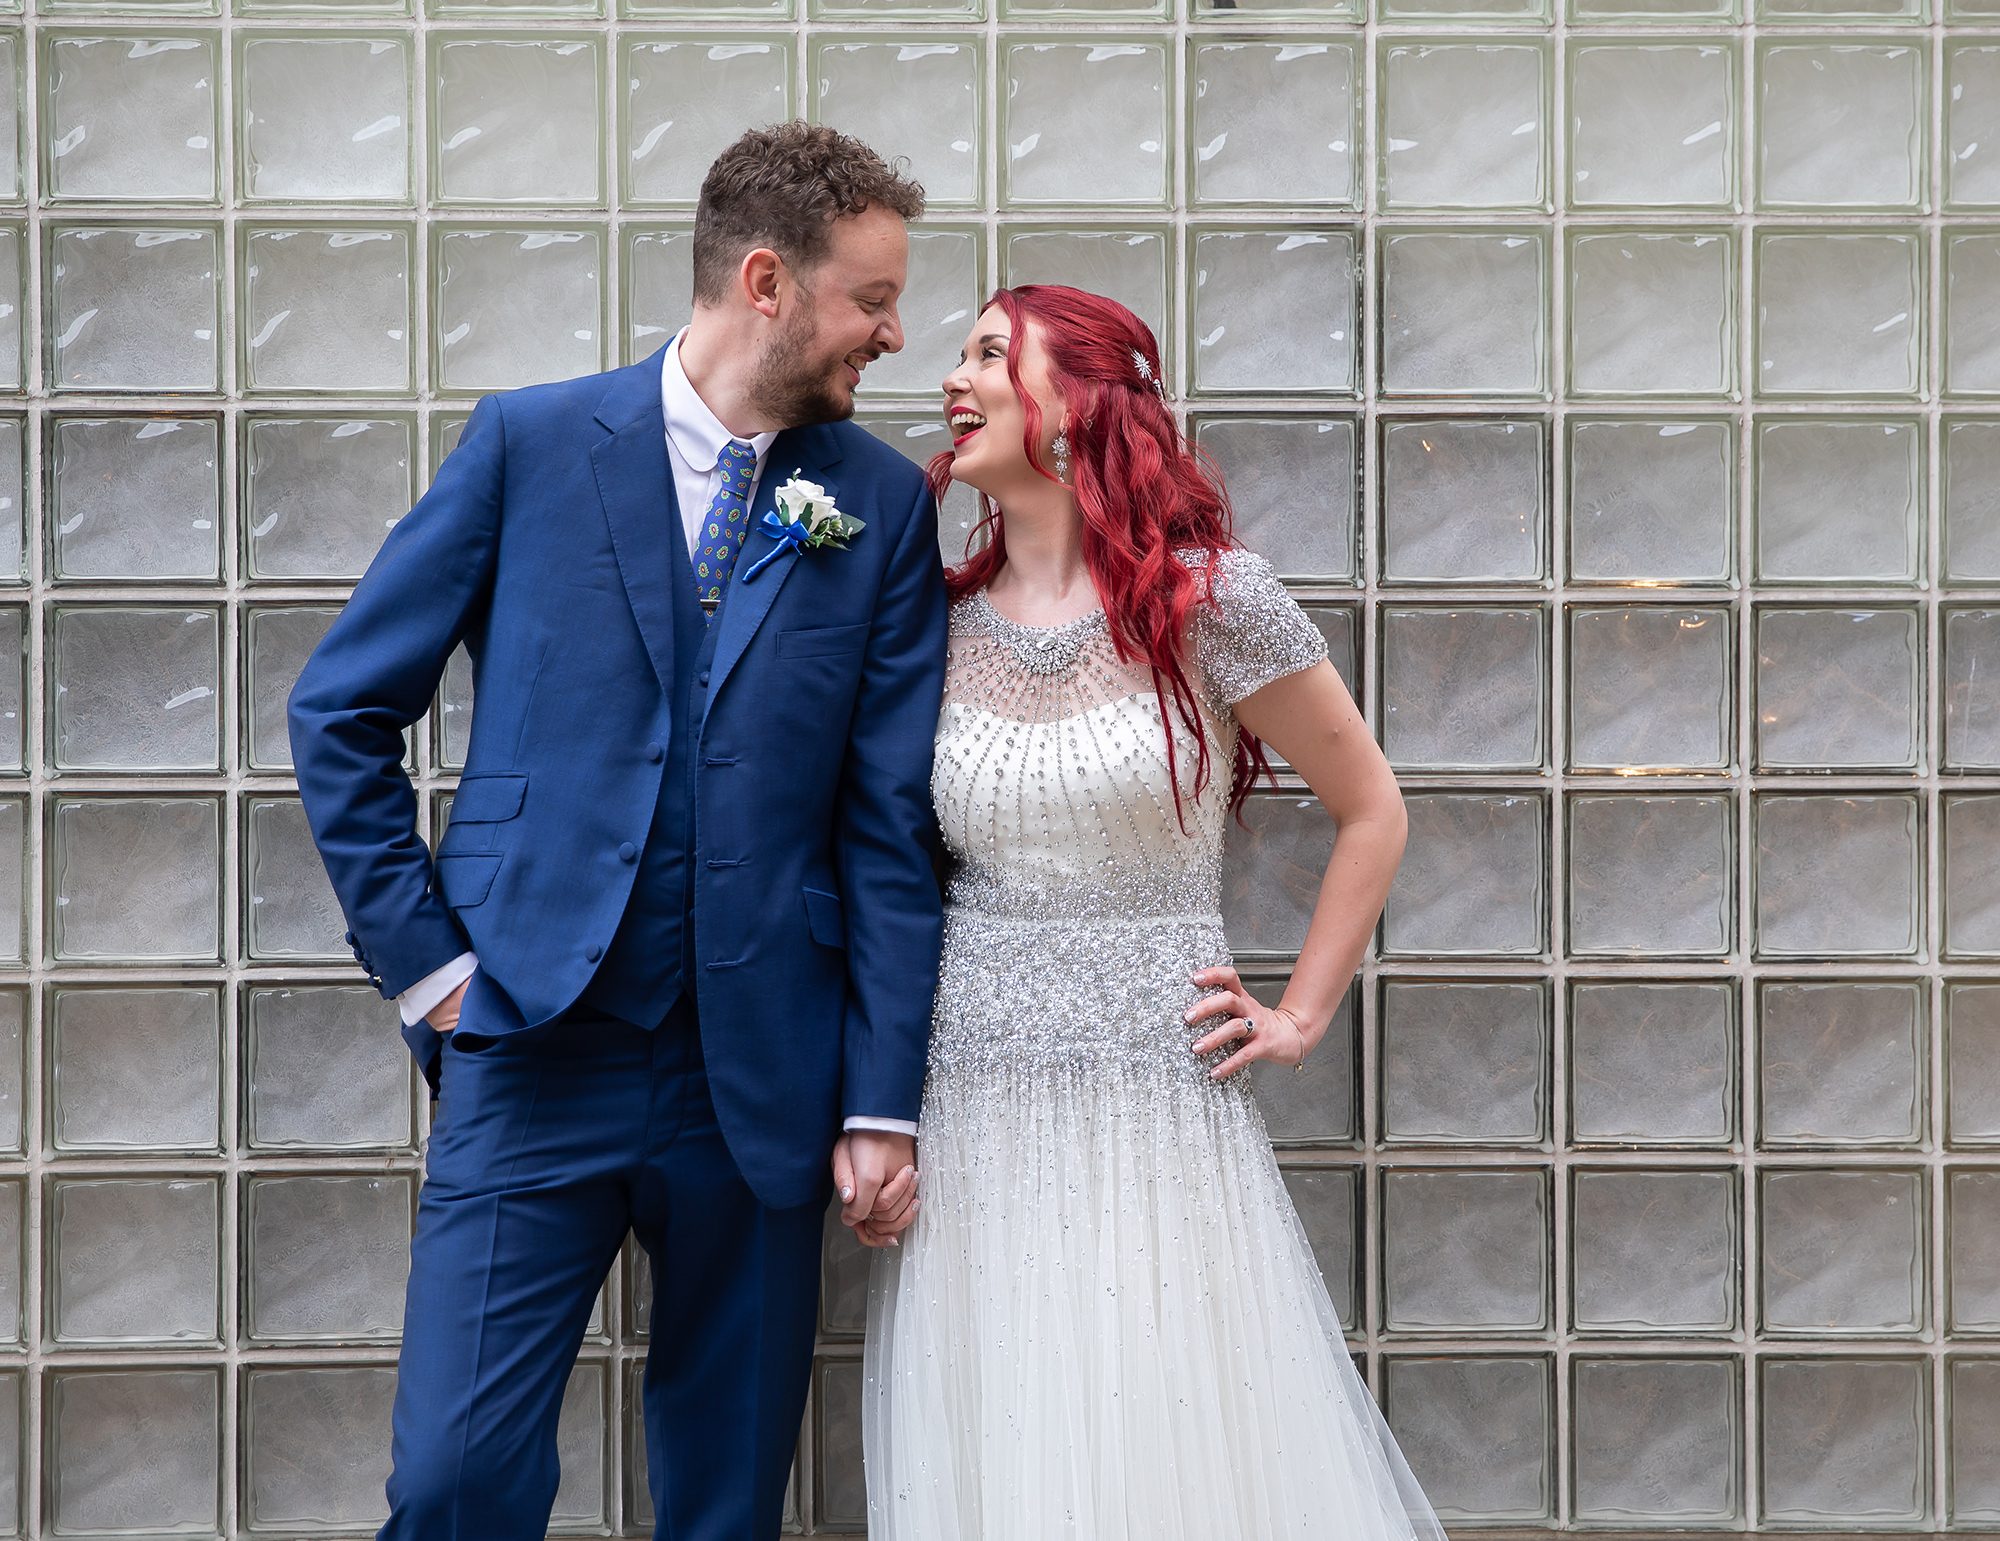 Islington wedding couple laughing by glass wall Upper Street London